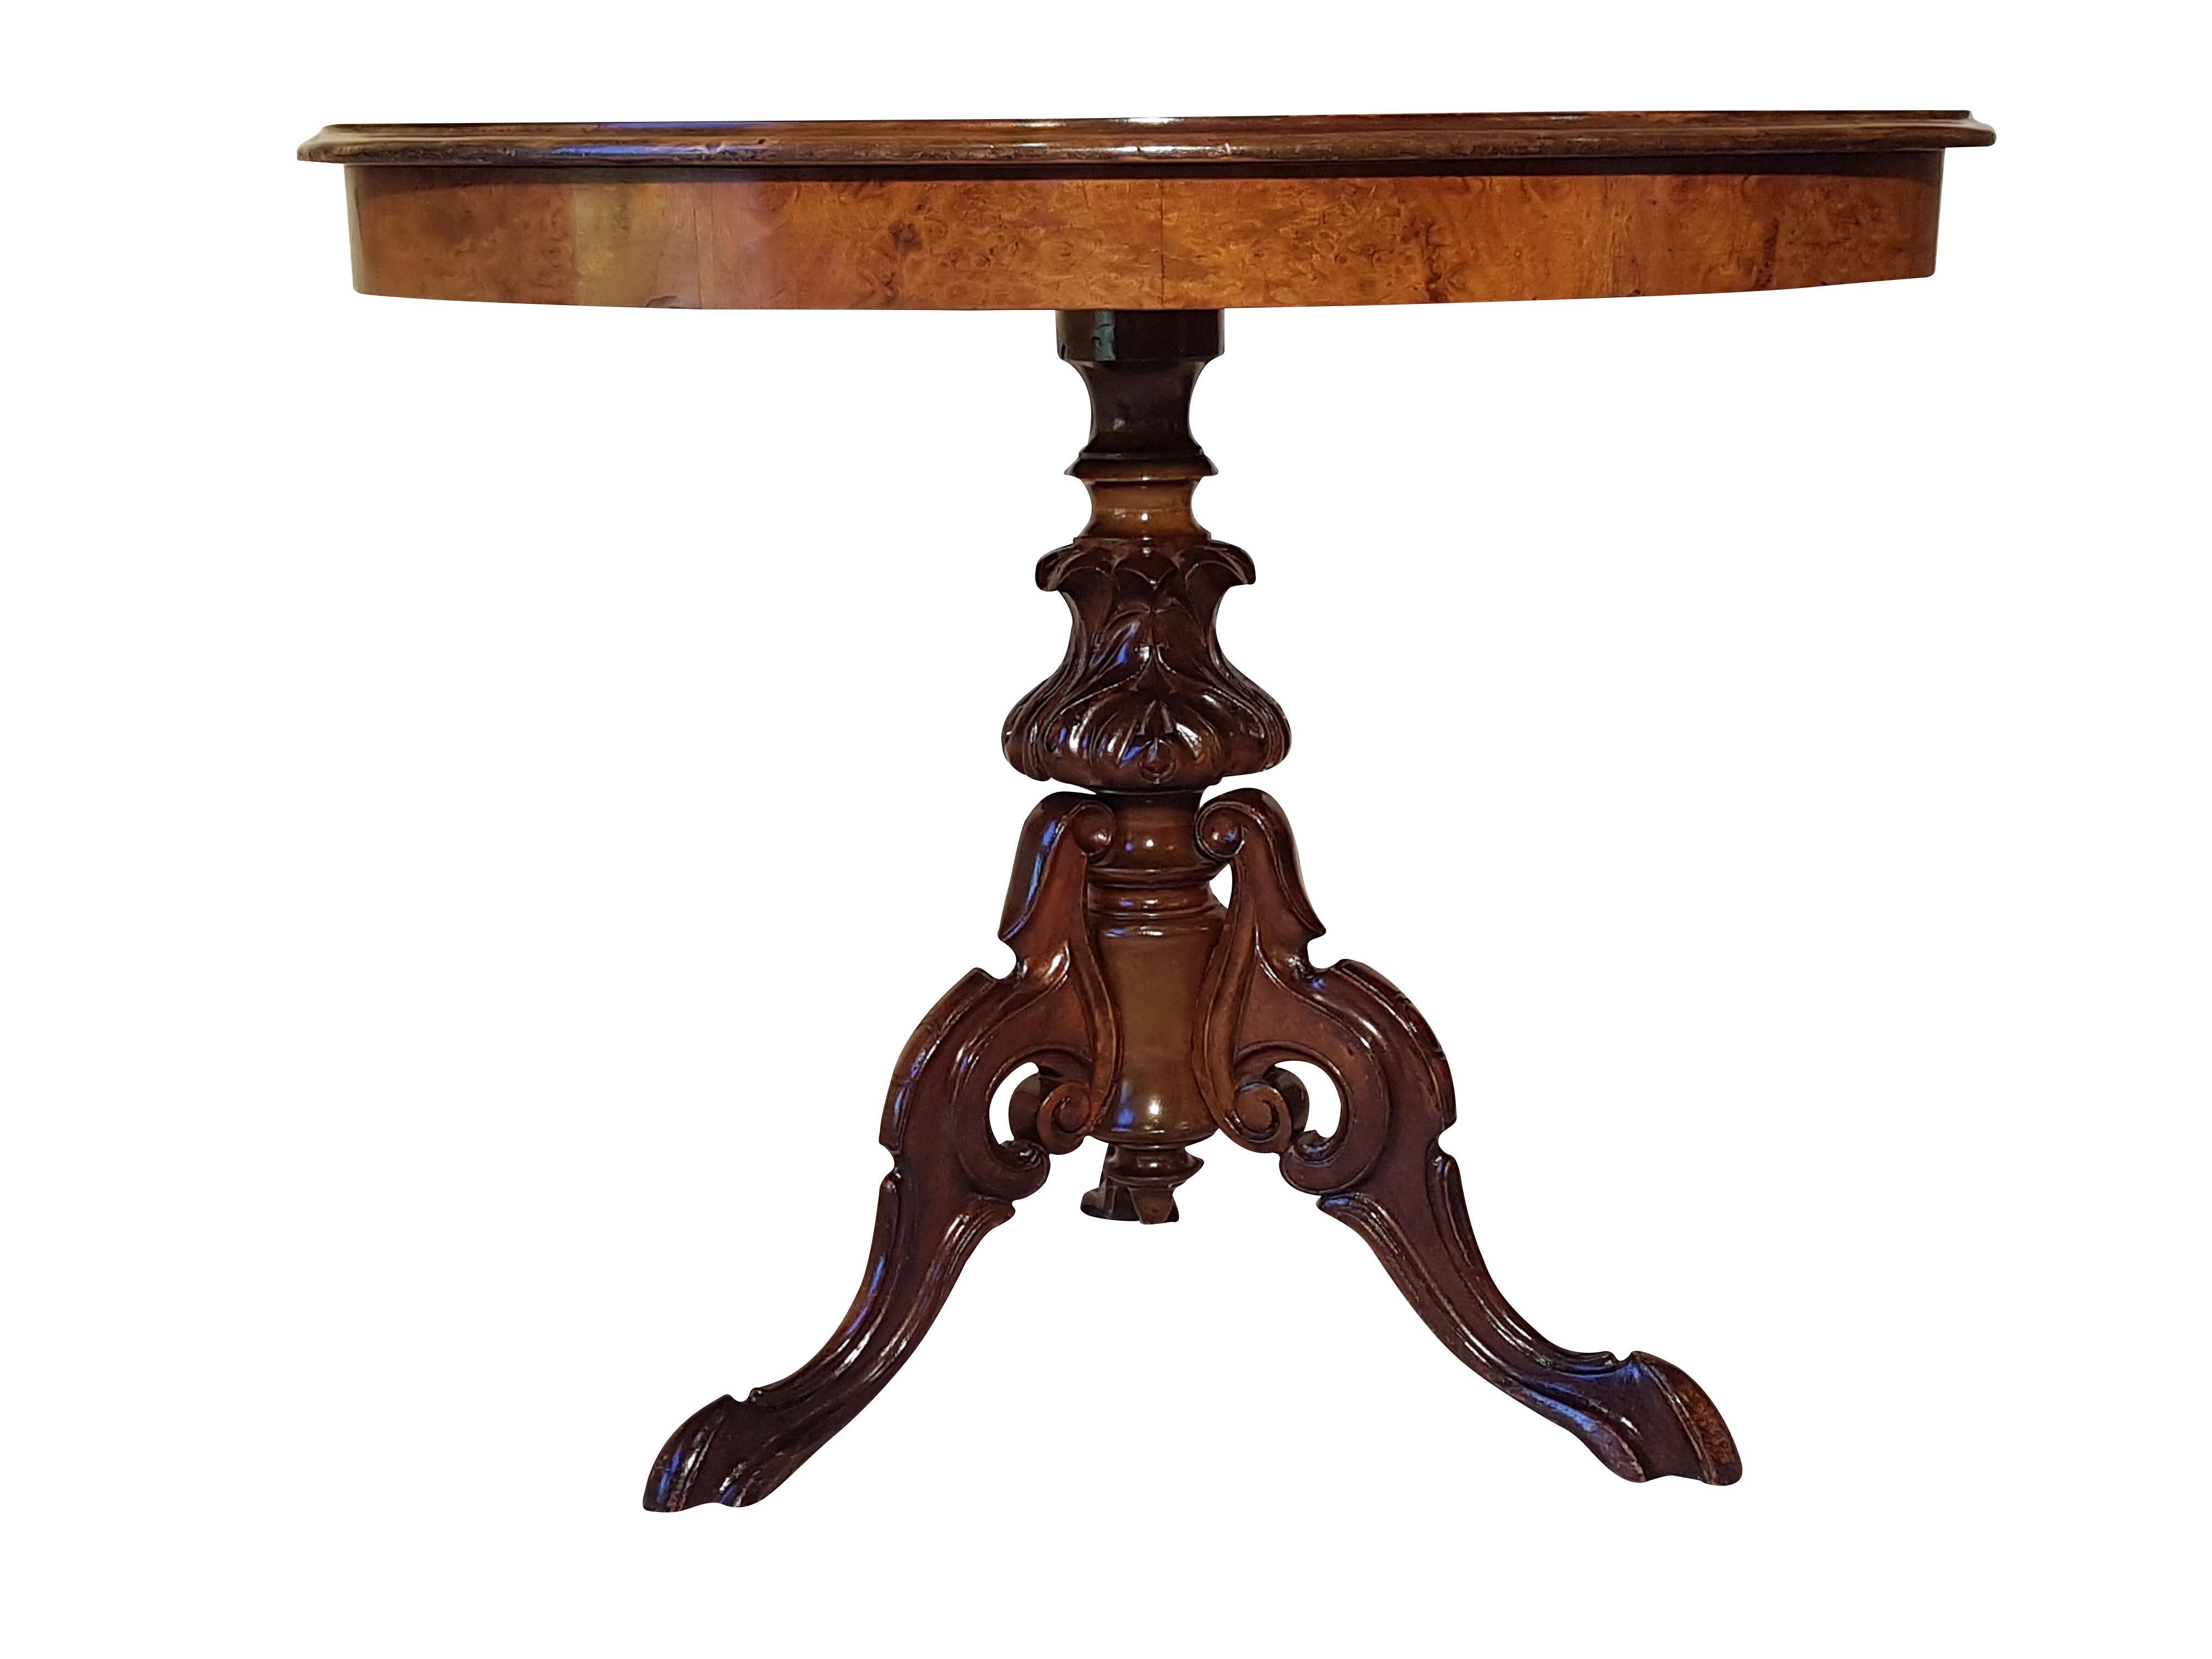 Antique side table made of a combination of a luxurious mahogany foot and beautifully grained walnut wood top. Restored 19th century piece with original patina and polished by hand with shellac. Features a wonderfully carved foot and an ellipsoid